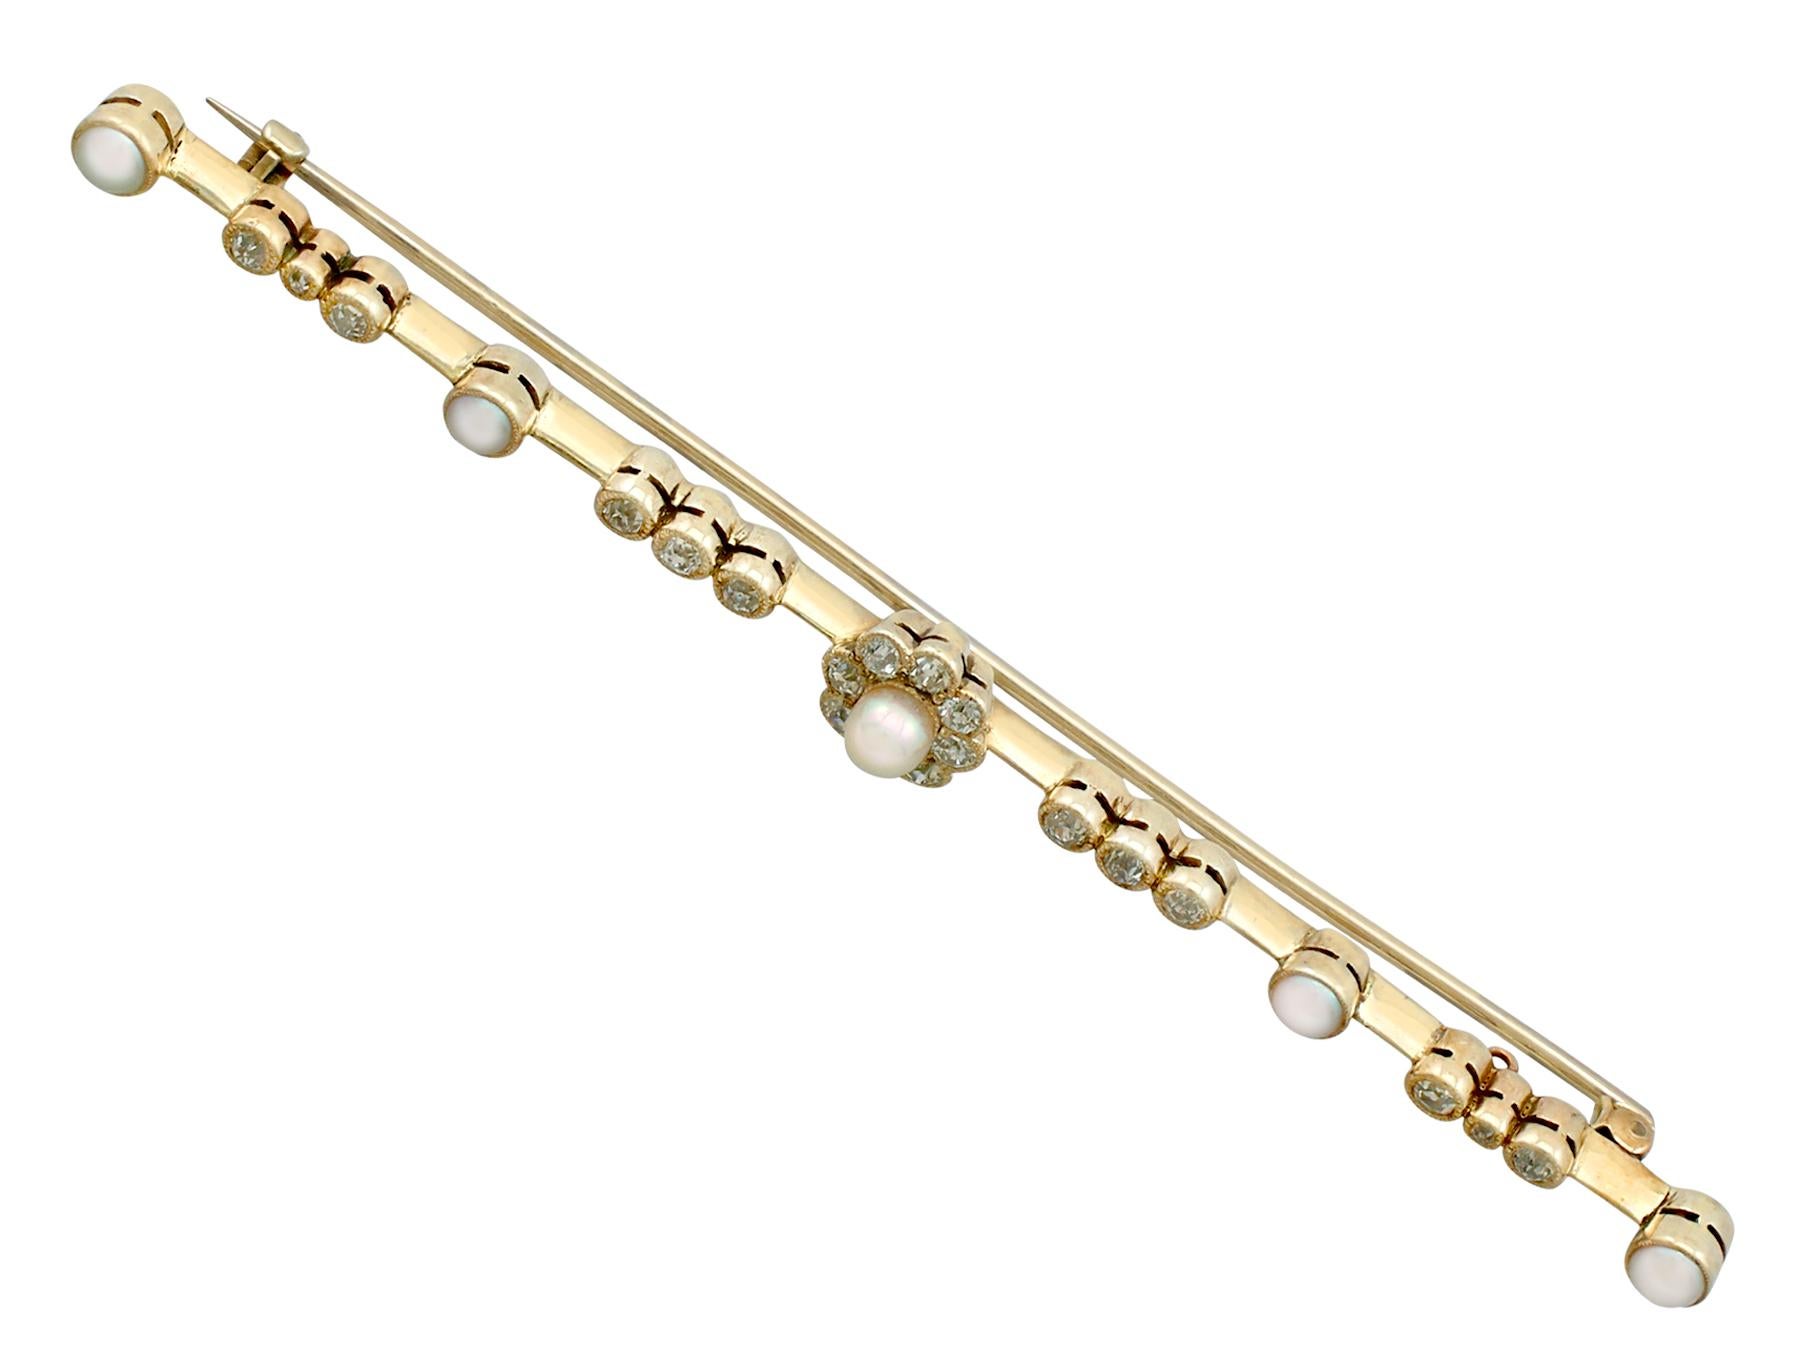 A fine Victorian 0.38 carat diamond and pearl, 15k yellow gold bar brooch; part of our antique jewelry and estate jewelry collections.

This impressive Victorian bar brooch has been crafted in 15k yellow gold.

The bar brooch has a feature cluster